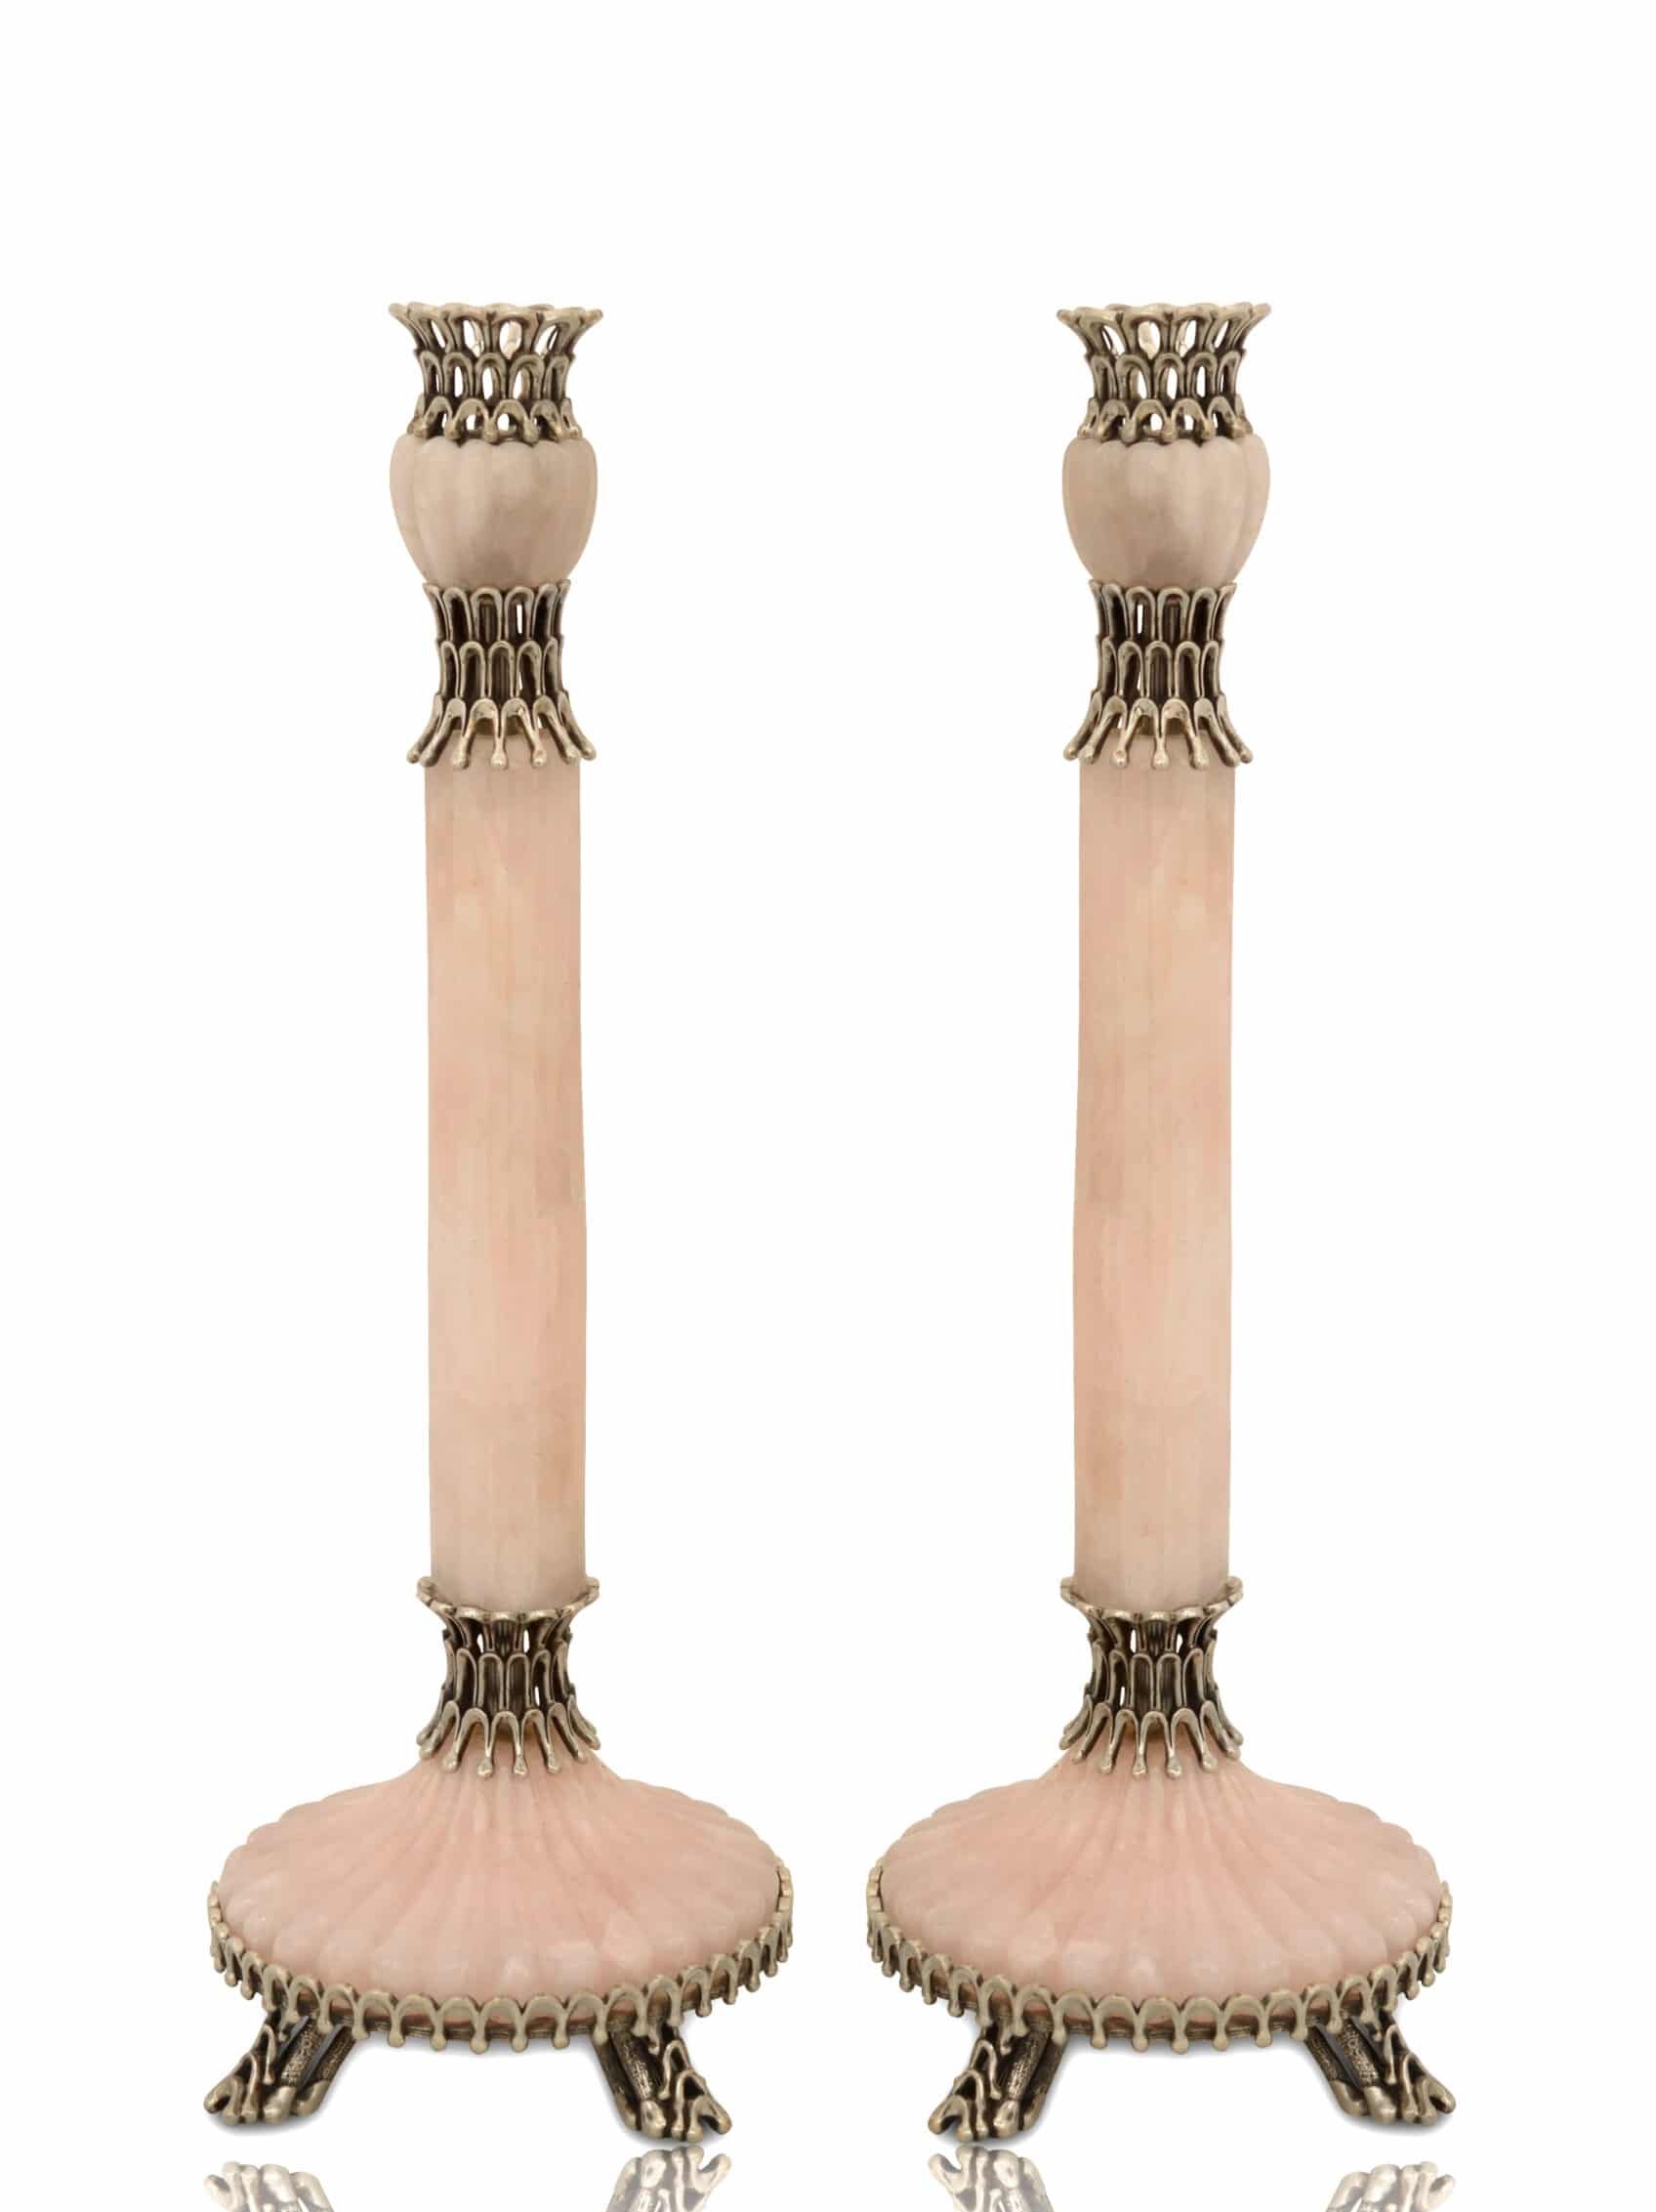 Large Sterling Silver & Onyx Candlesticks